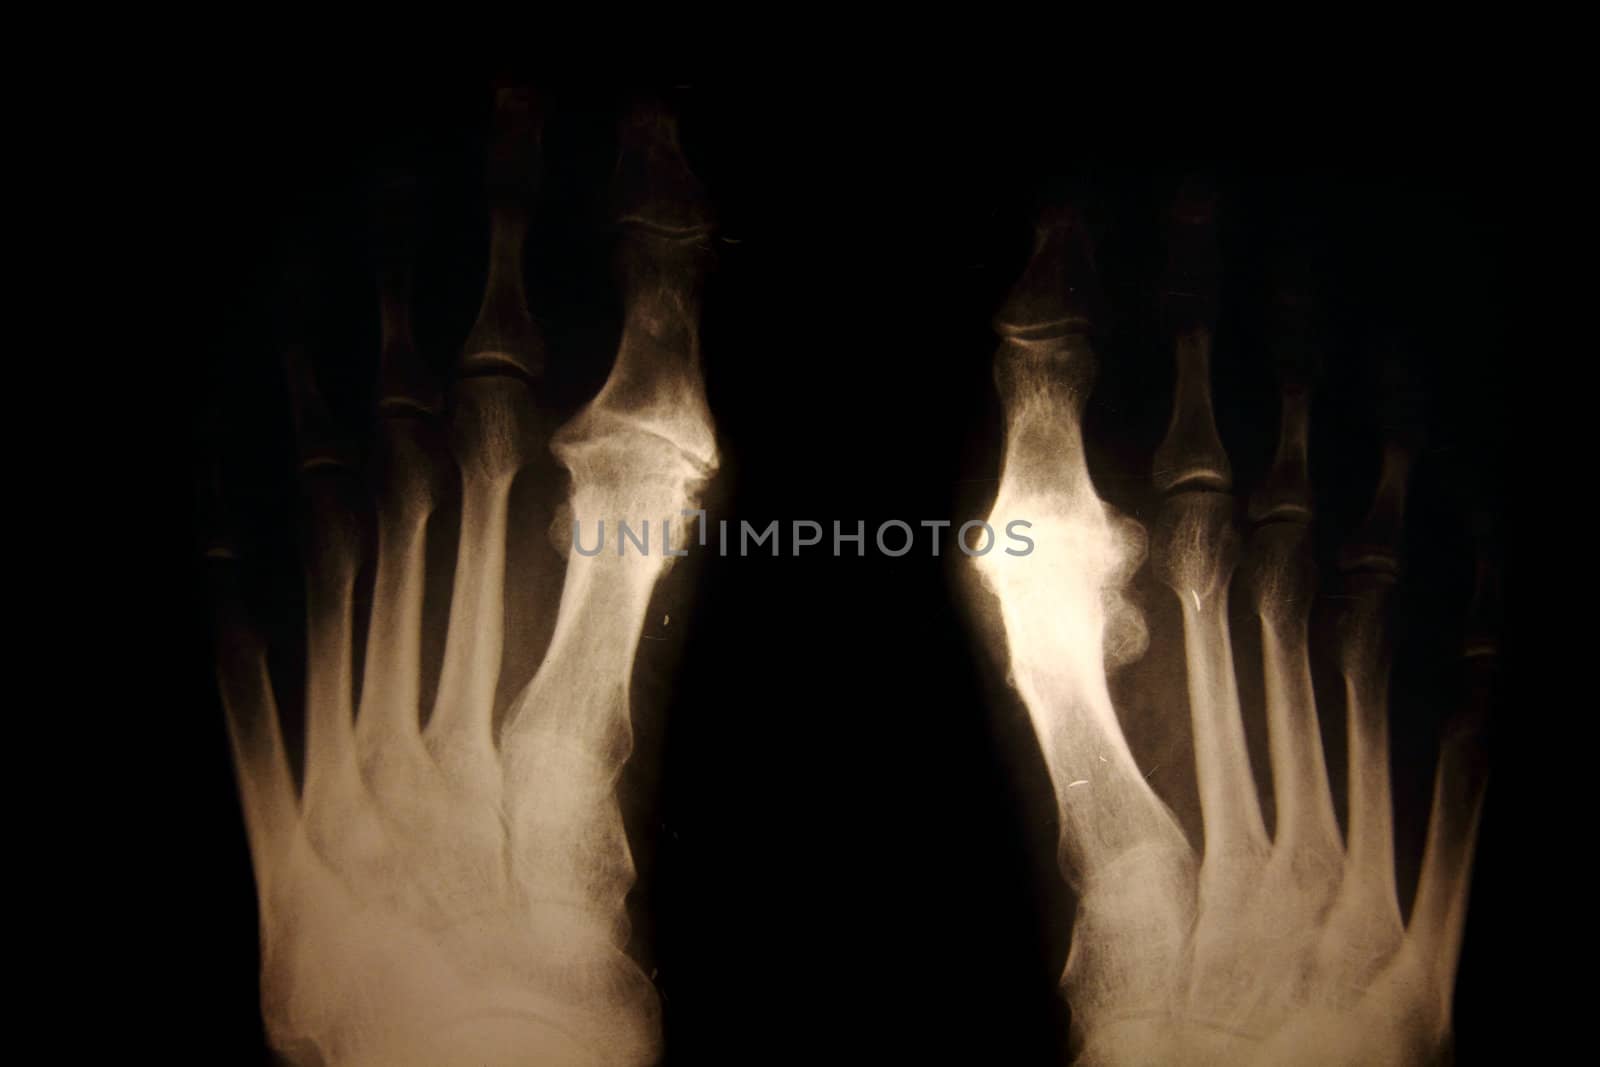 x-ray of foots as nice medical background